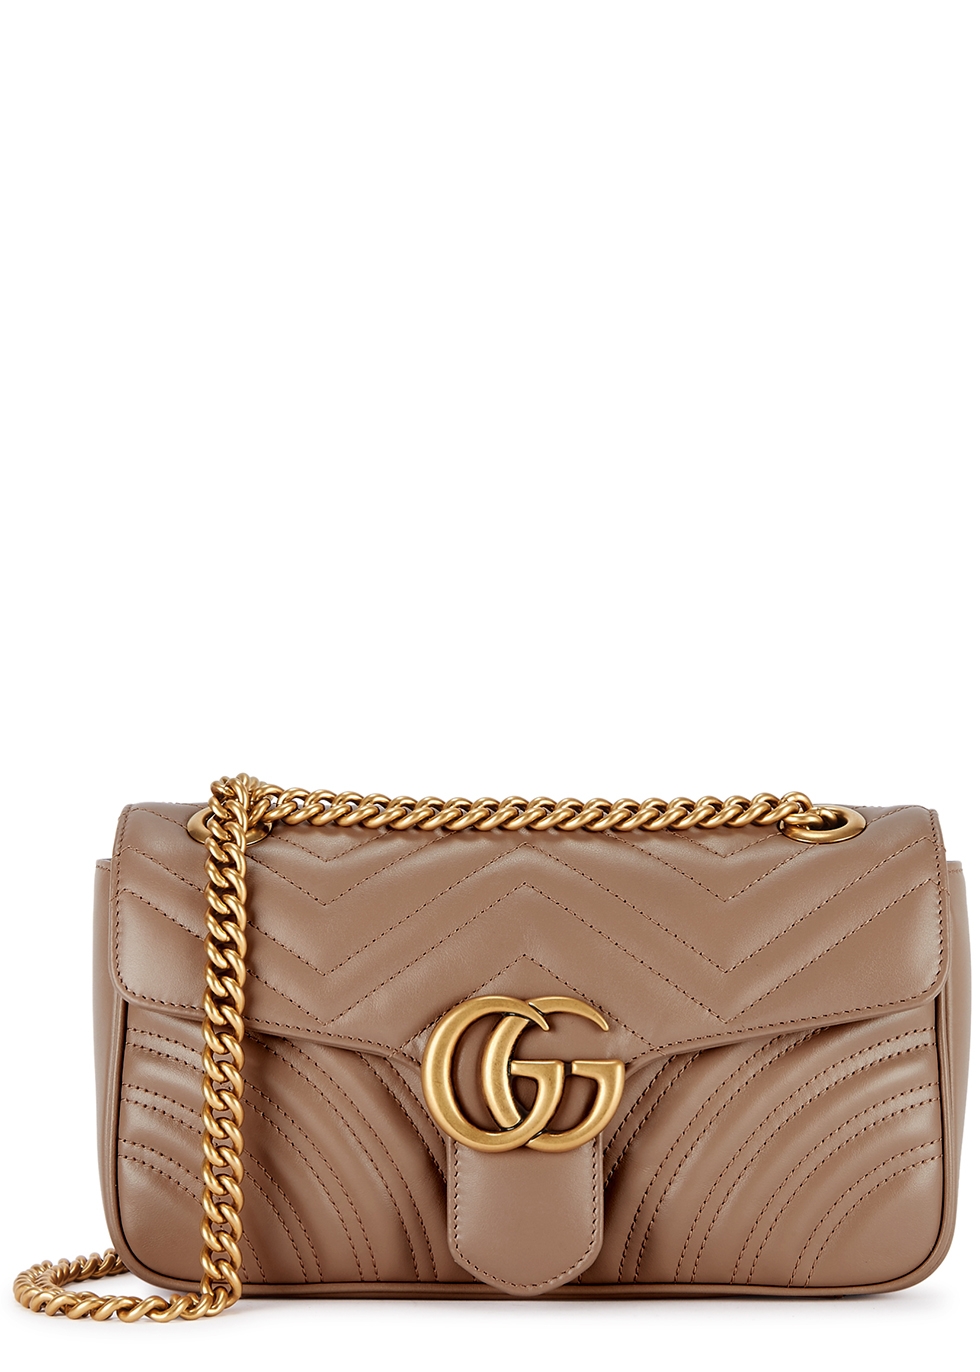 Gucci GG Marmont small rose leather 